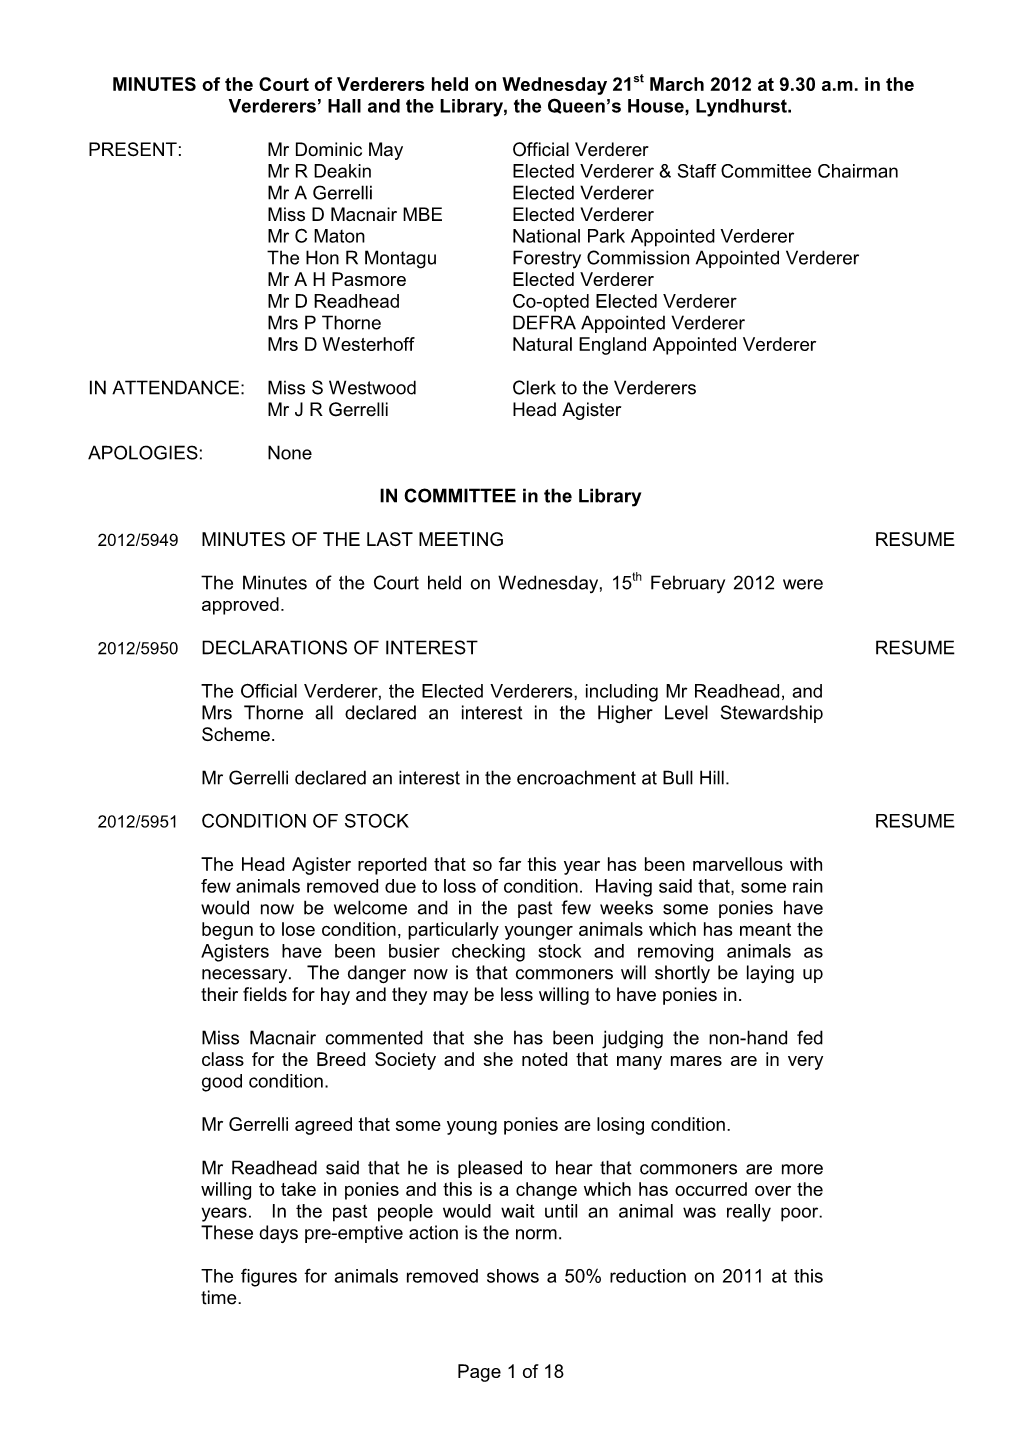 MINUTES of the Court of Verderers Held on Wednesday 21St March 2012 at 9.30 A.M